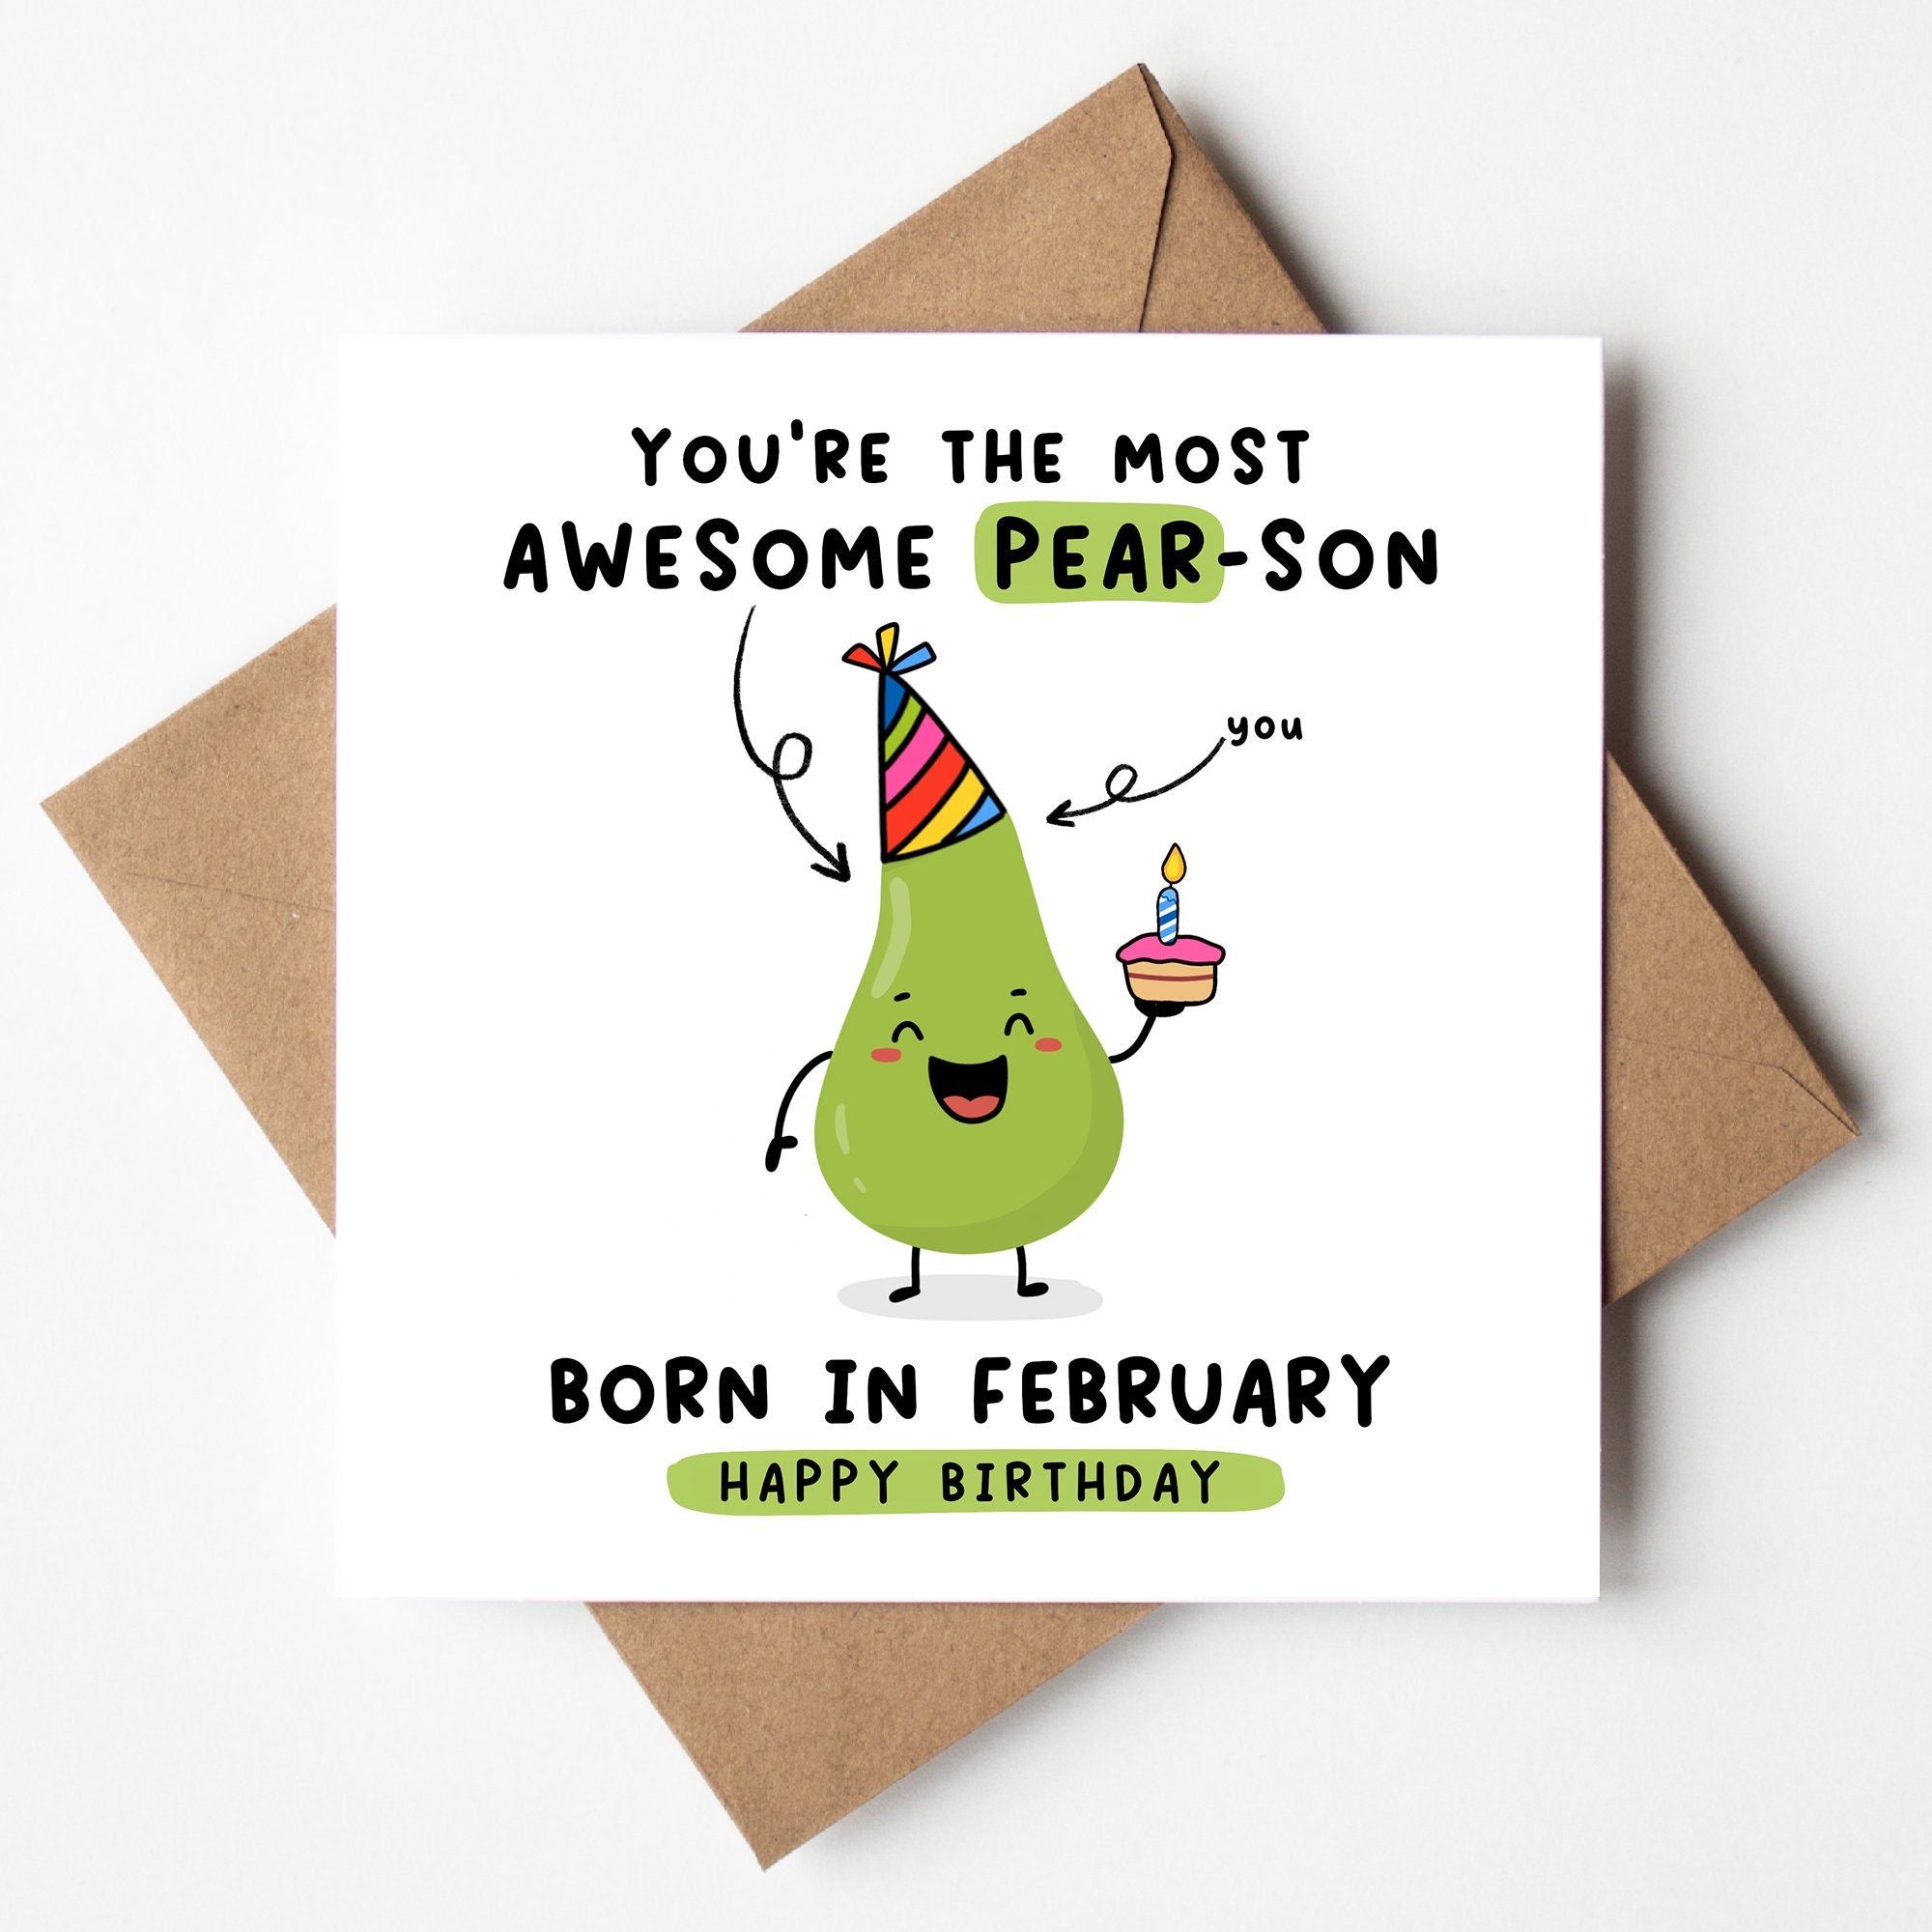 You're The Most Awesome Pear-son born in February, Funny Pun Card, Pear Pun Card, Born In February, Birth Month Card February